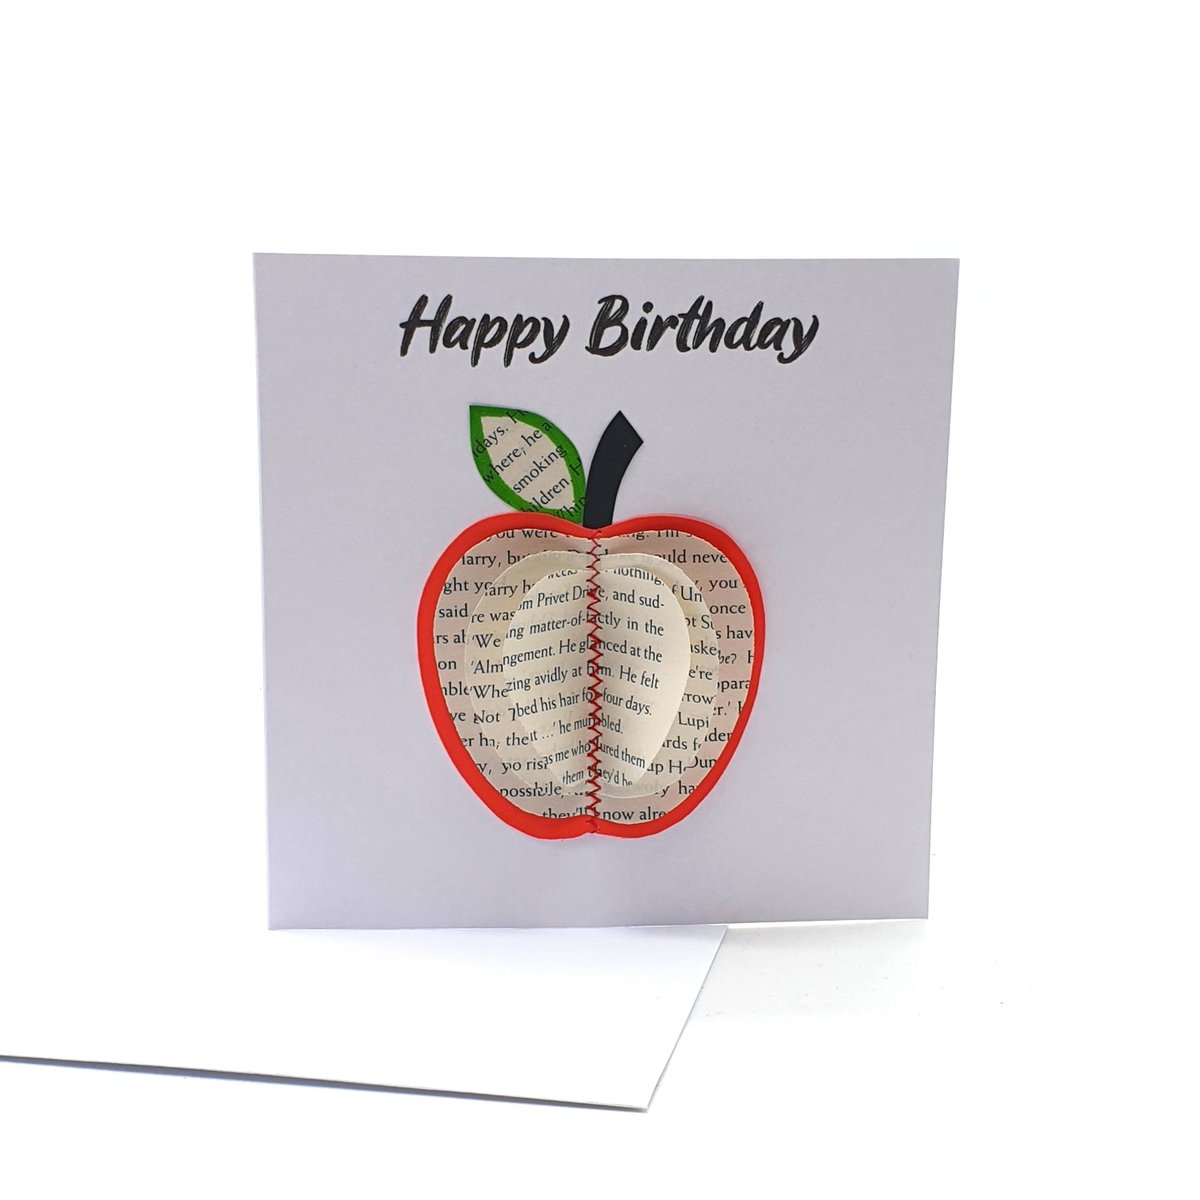 Happy Birthday Card Gift creatoncrafts.com/products/happy… #mhhsbd #CreatonCrafts #Shopify #RedAppleCard